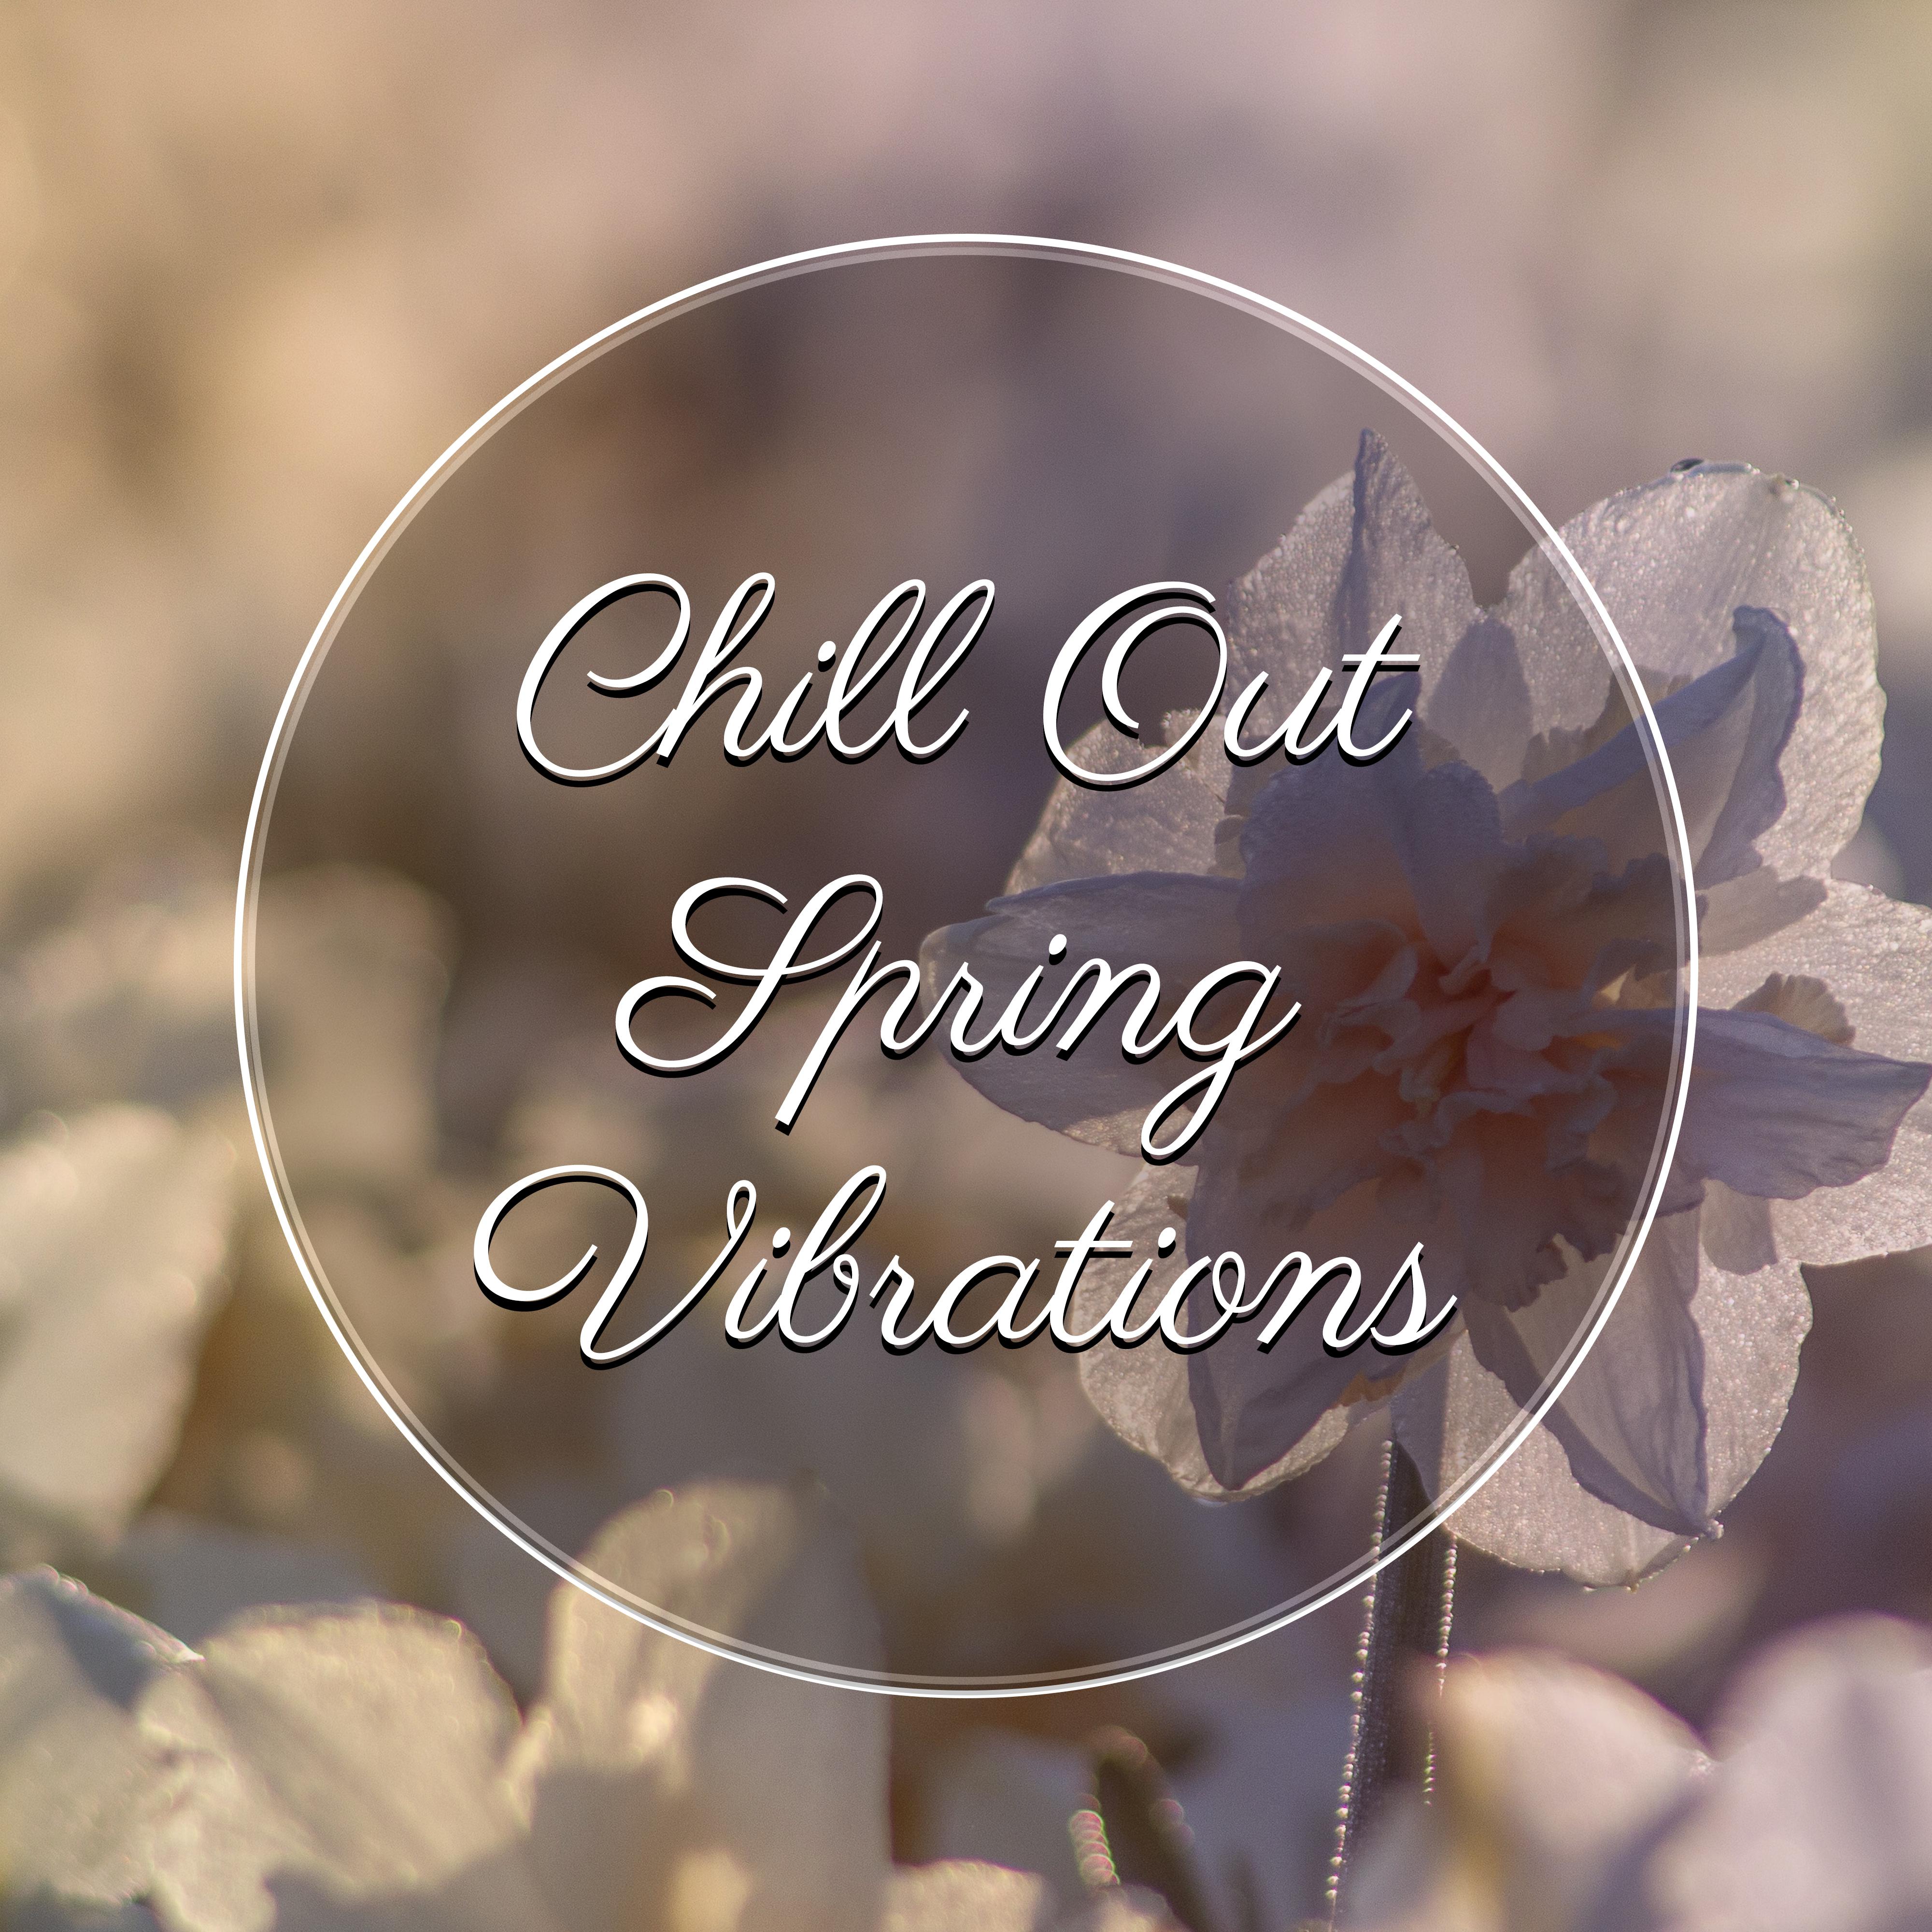 Chill Out Spring Vibrations – New Chillout, Total Relax, Deep Chill Out Beats